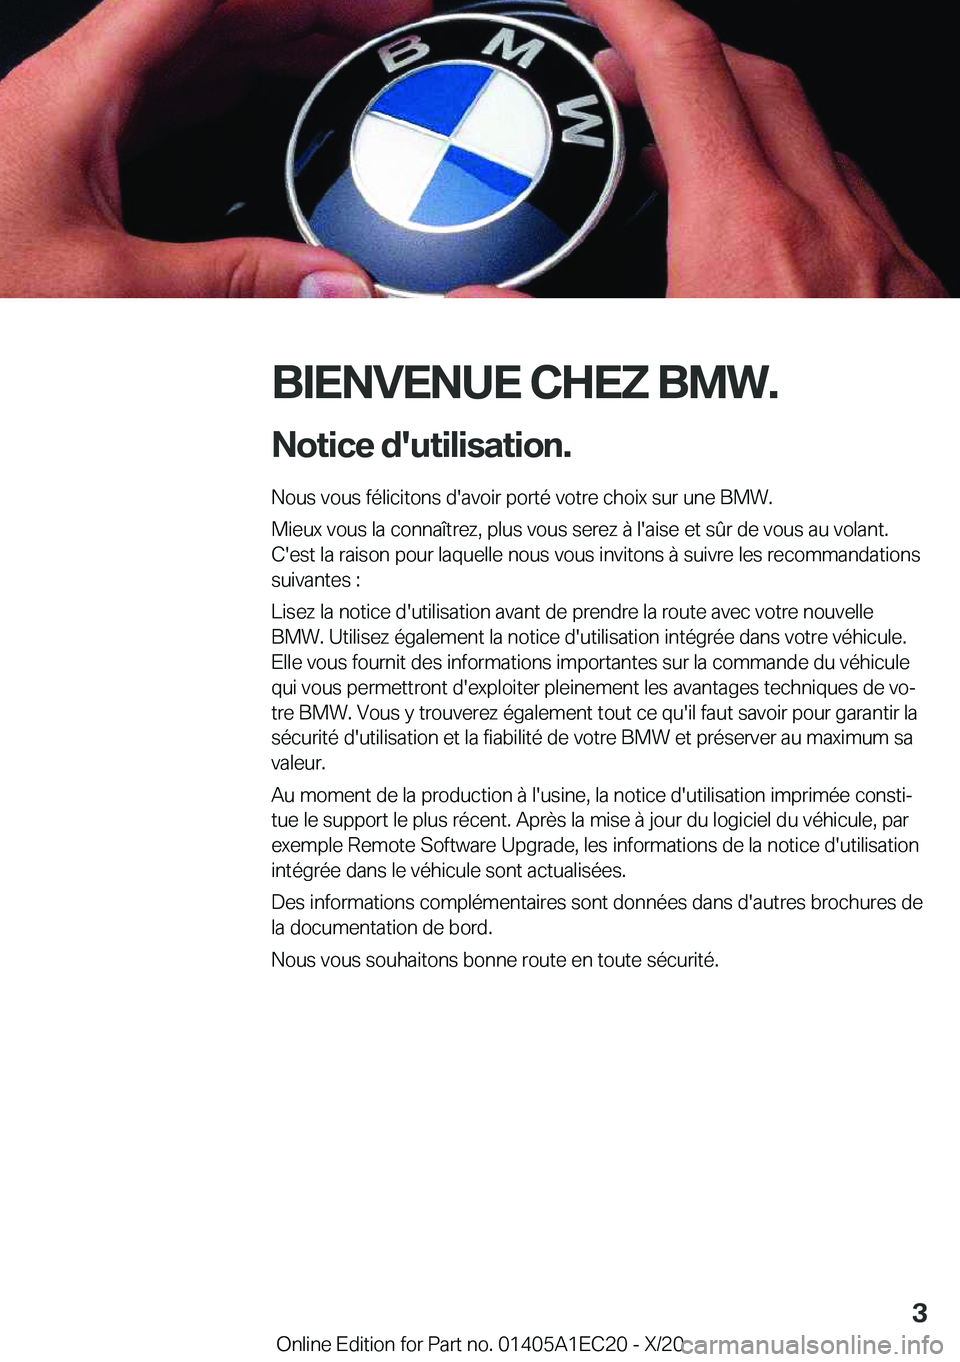 BMW 8 SERIES GRAN COUPE 2021  Notices Demploi (in French) �B�I�E�N�V�E�N�U�E��C�H�E�Z��B�M�W�.�N�o�t�i�c�e��d�'�u�t�i�l�i�s�a�t�i�o�n�.
�N�o�u�s��v�o�u�s��f�é�l�i�c�i�t�o�n�s��d�'�a�v�o�i�r��p�o�r�t�é��v�o�t�r�e��c�h�o�i�x��s�u�r��u�n�e�